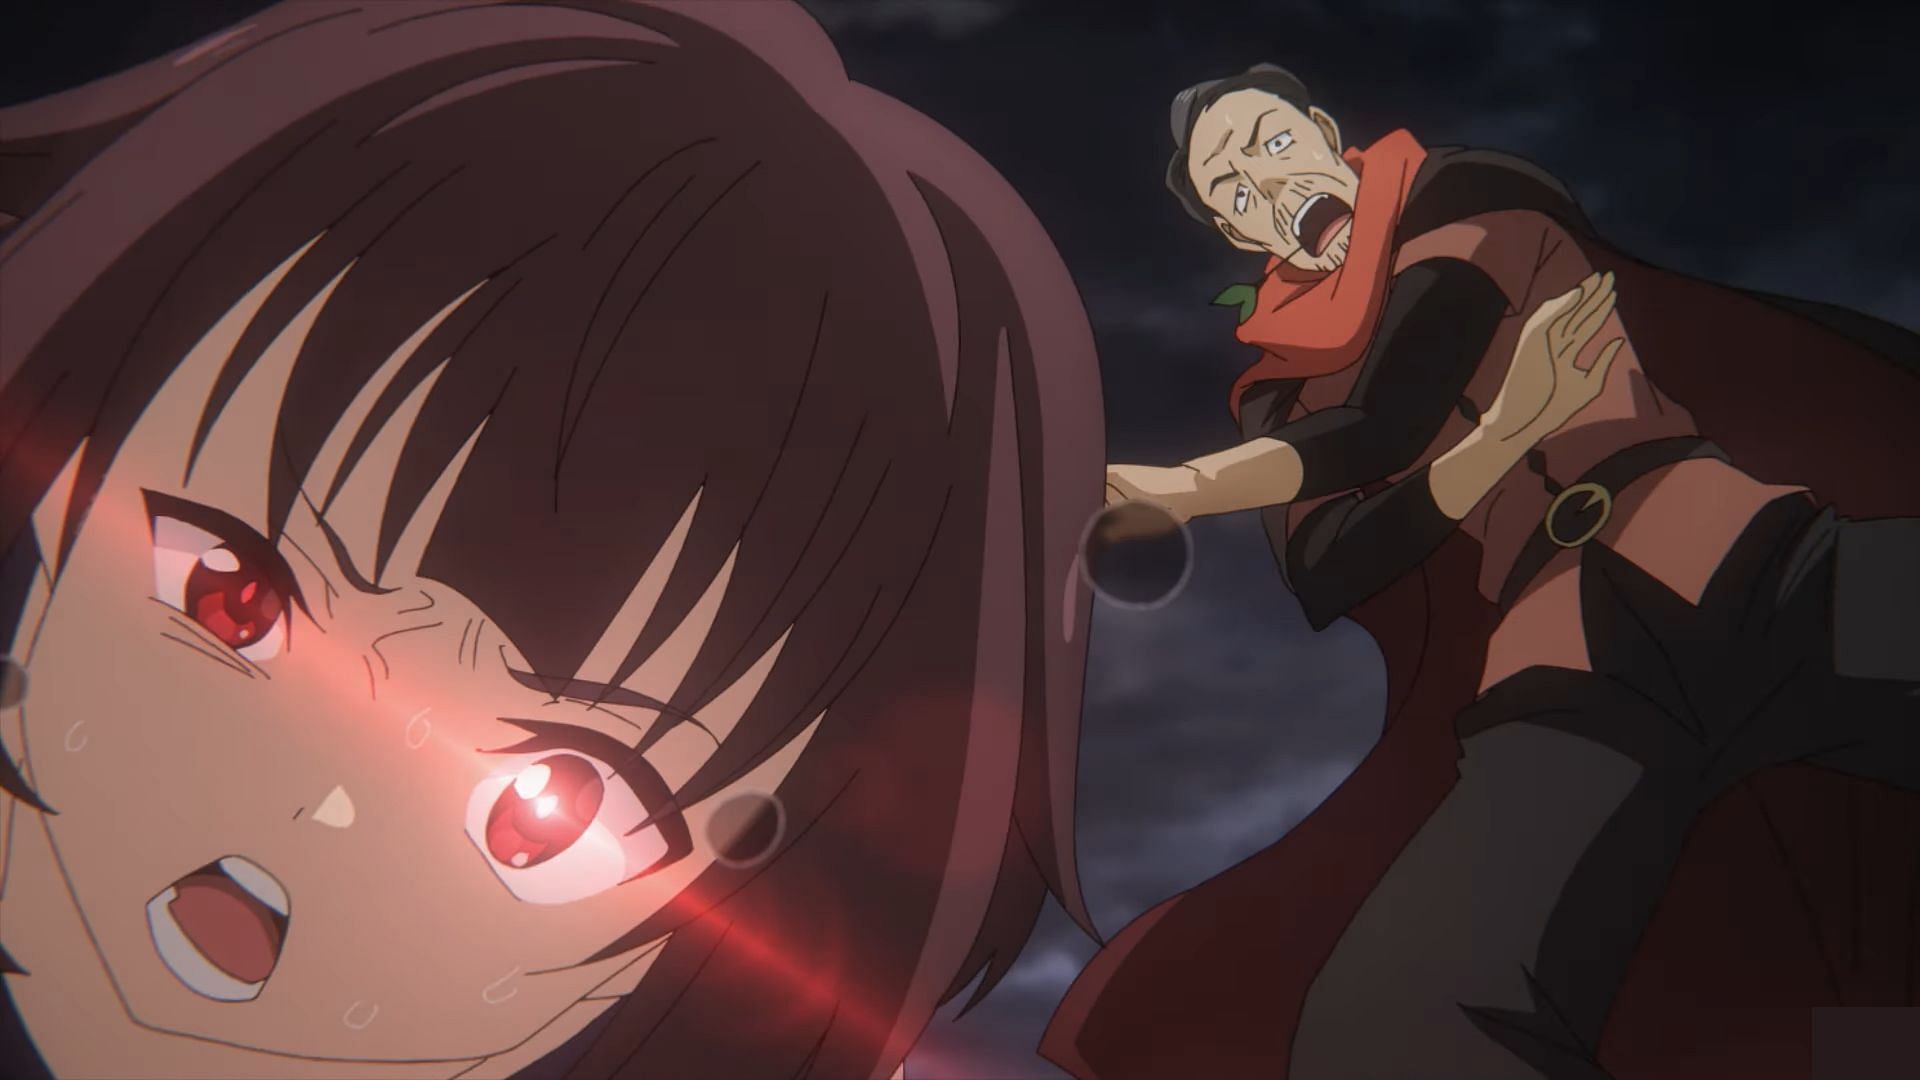 Megumin and her teacher as seen in the anime (Image via Studio Drive)